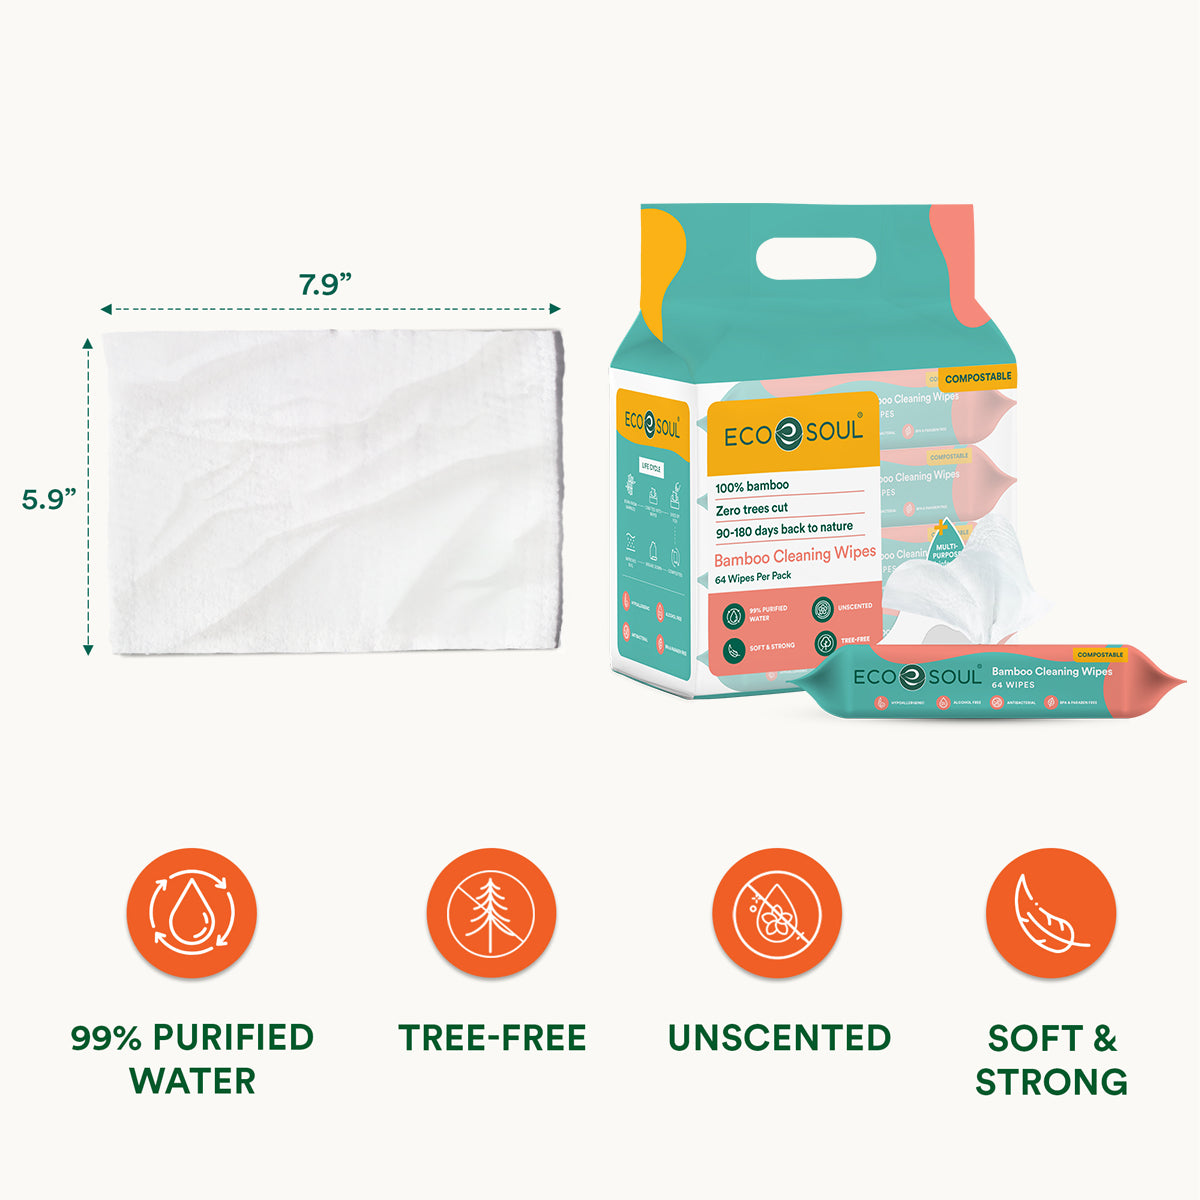 A photo of the Bamboo Premium Cleaning Wipes, highlighting their measurement and features.